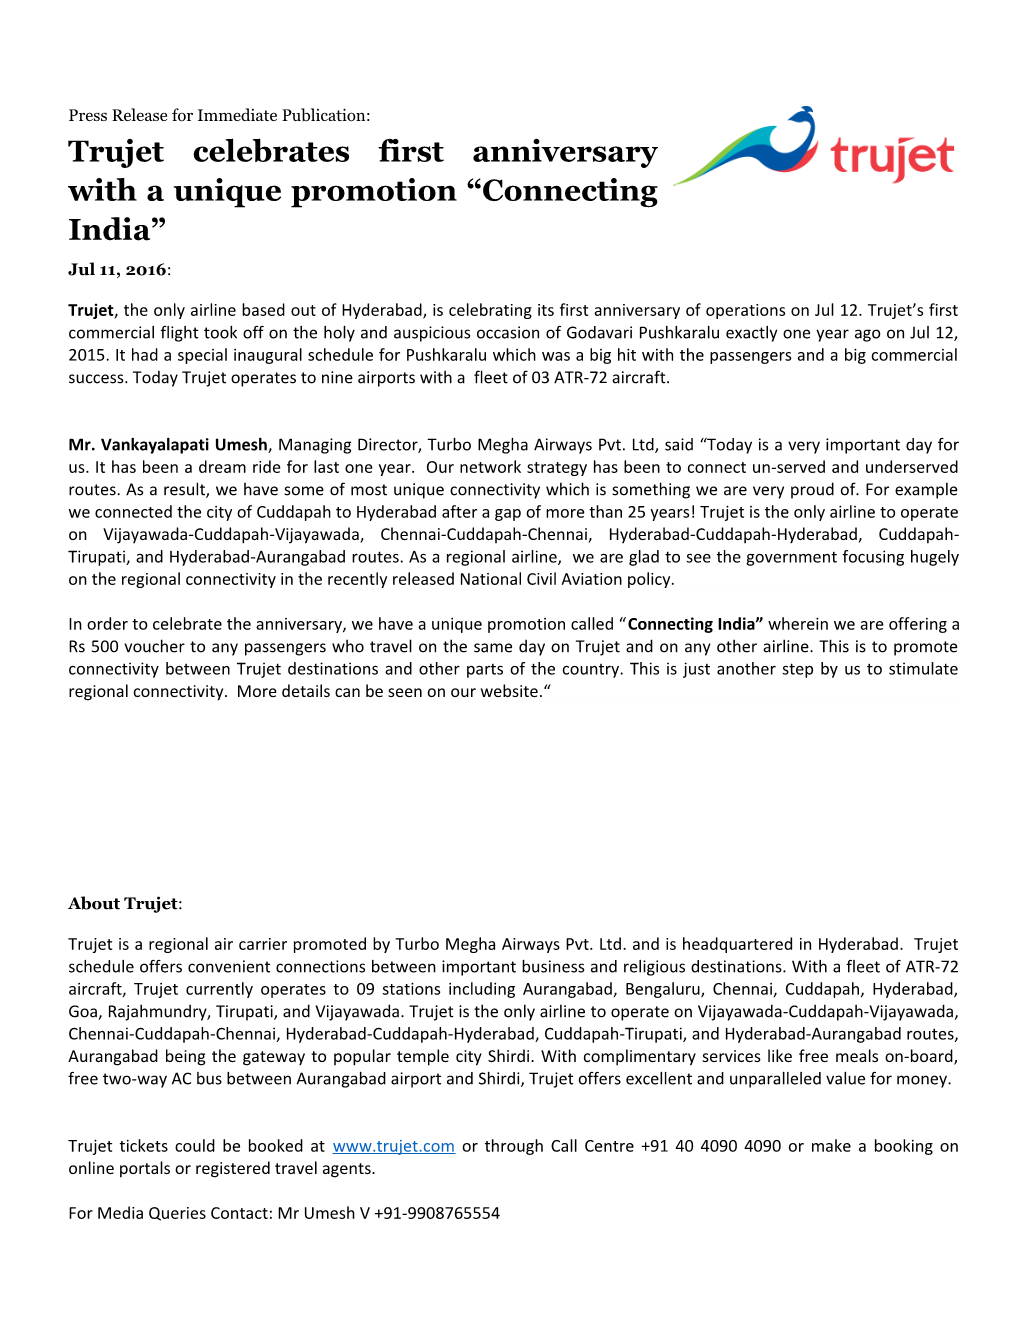 Trujet Celebrates First Anniversary with a Unique Promotion Connecting India